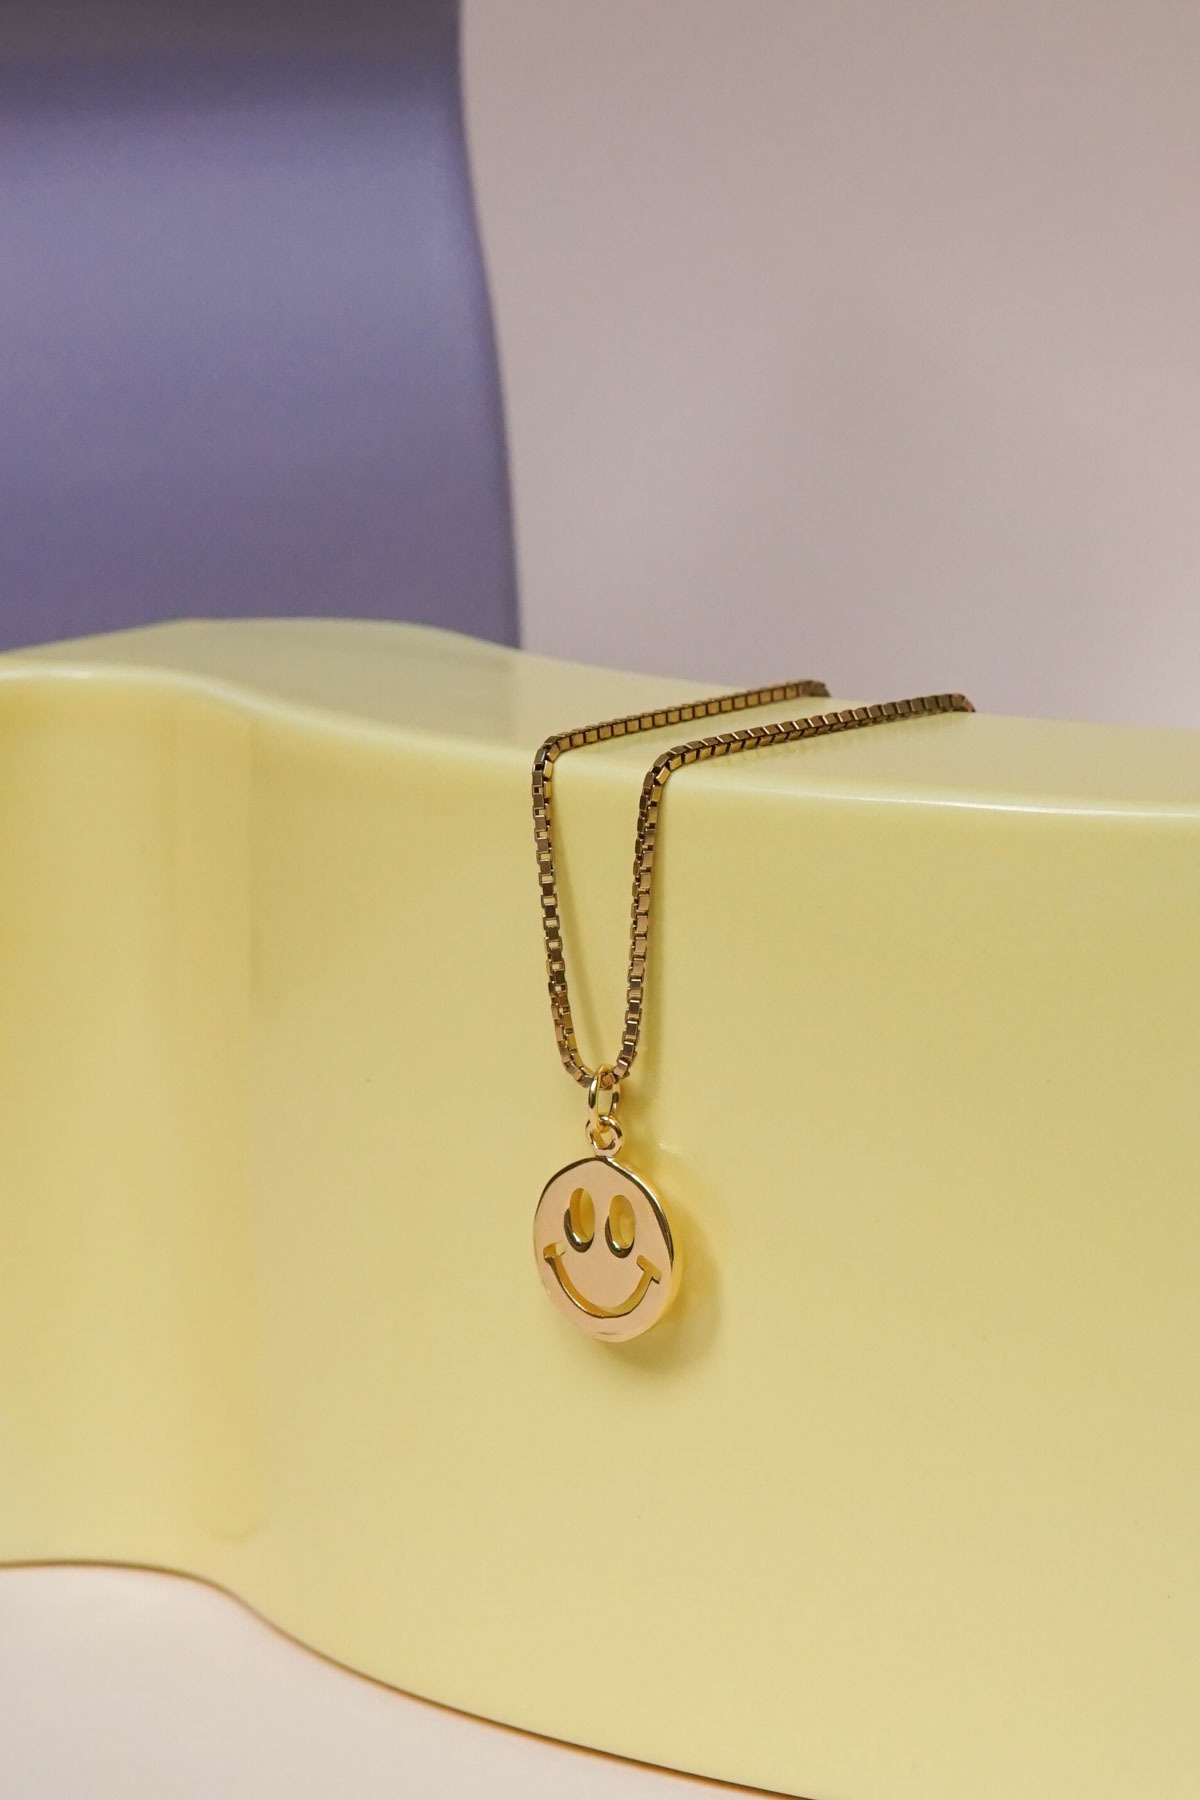 wildthings collectables - Smiley necklace gold plated 3